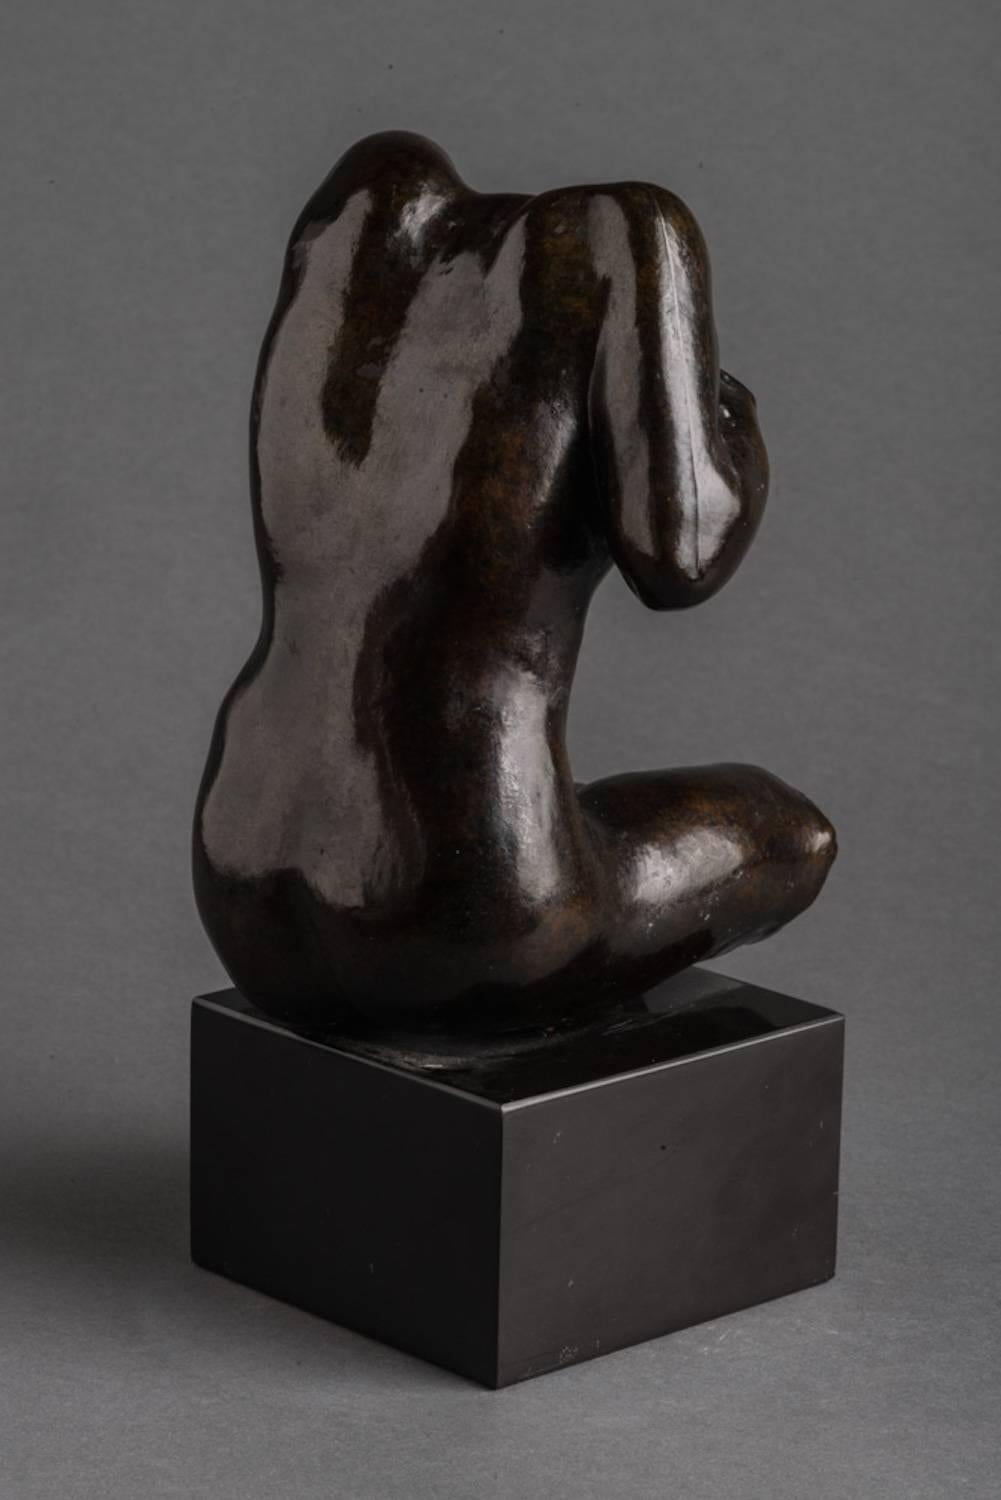 Torso de Femme, conceived circa 1900, cast in 1979
Bronze
4 1/2 x 5 x 7 1/2 inches
Edition of 12
Signed, annotated and stamped
ROD055A